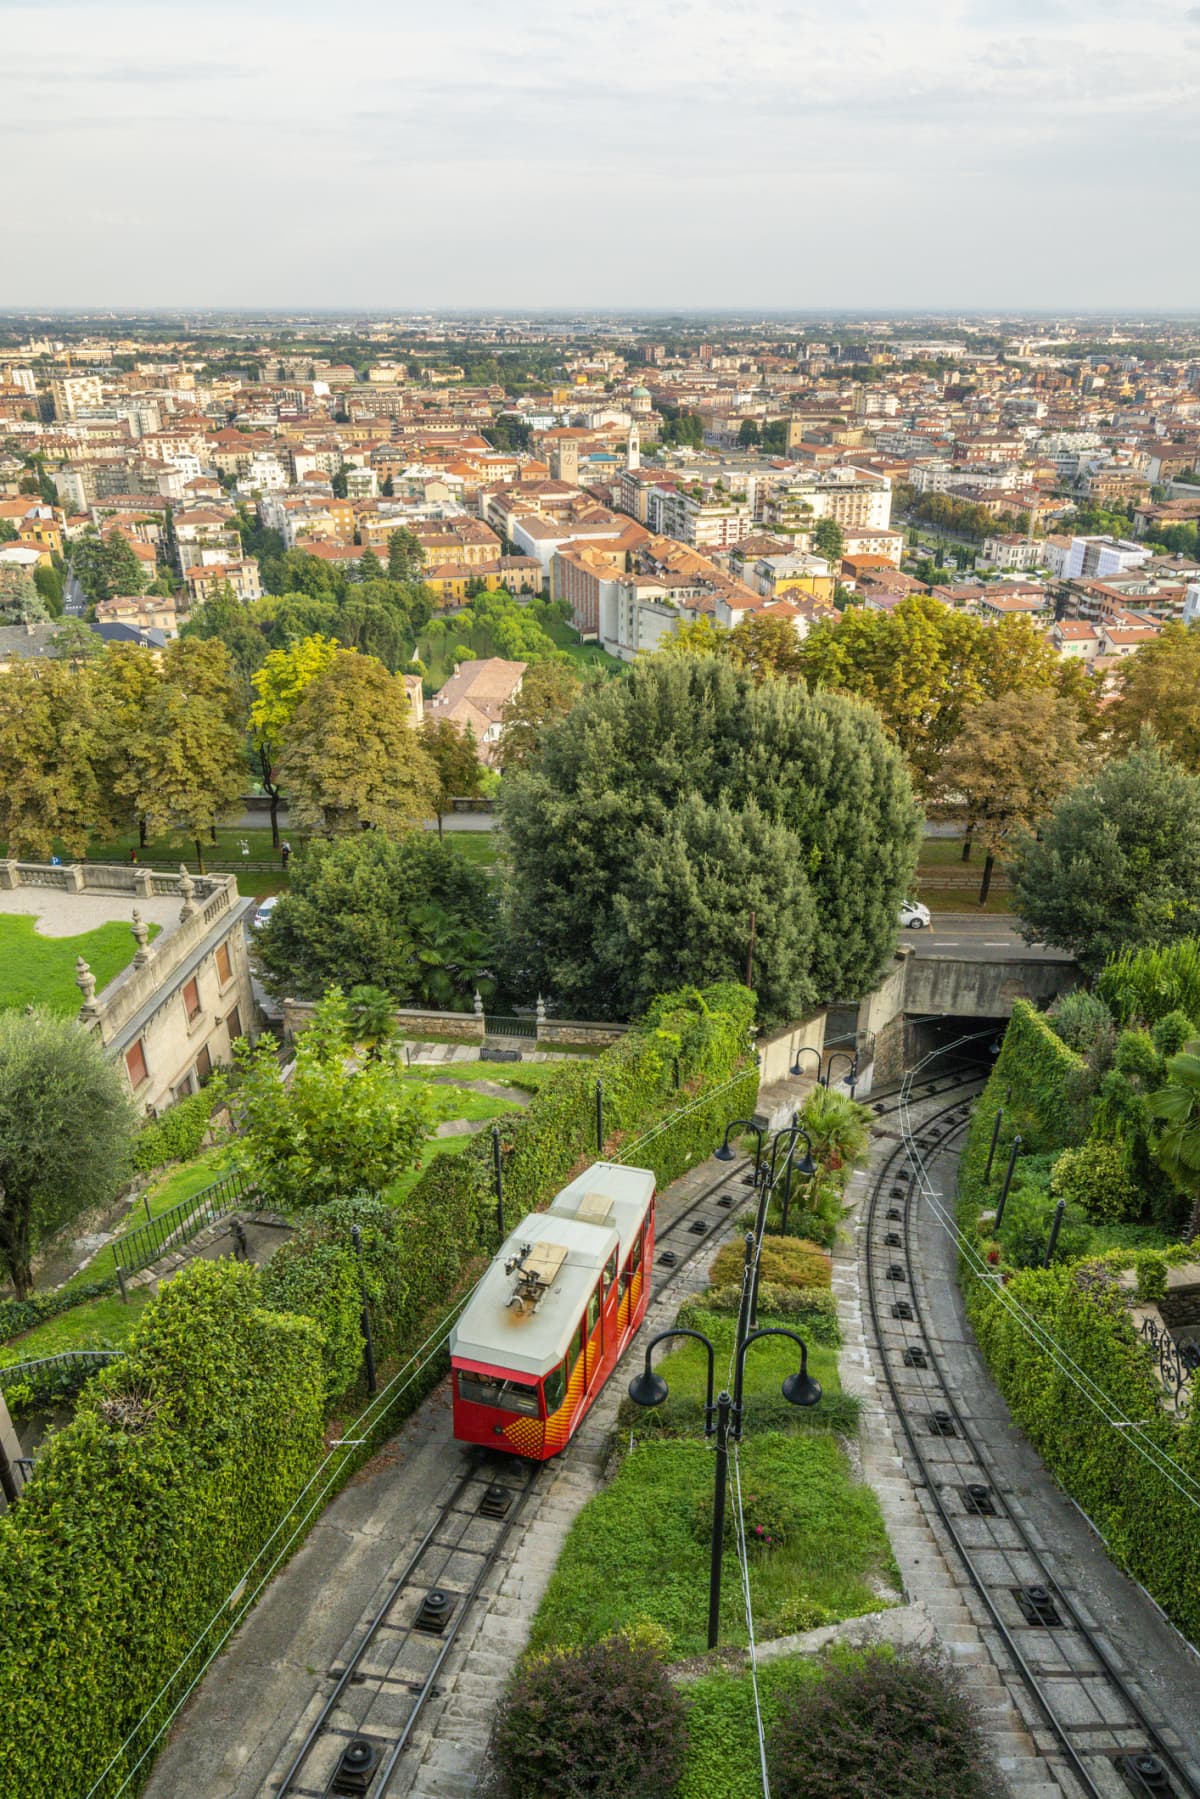 Old funicular connecting the center of Bergamo with Città Alta (Upper Town), Bergamo, Lombardy, Italy